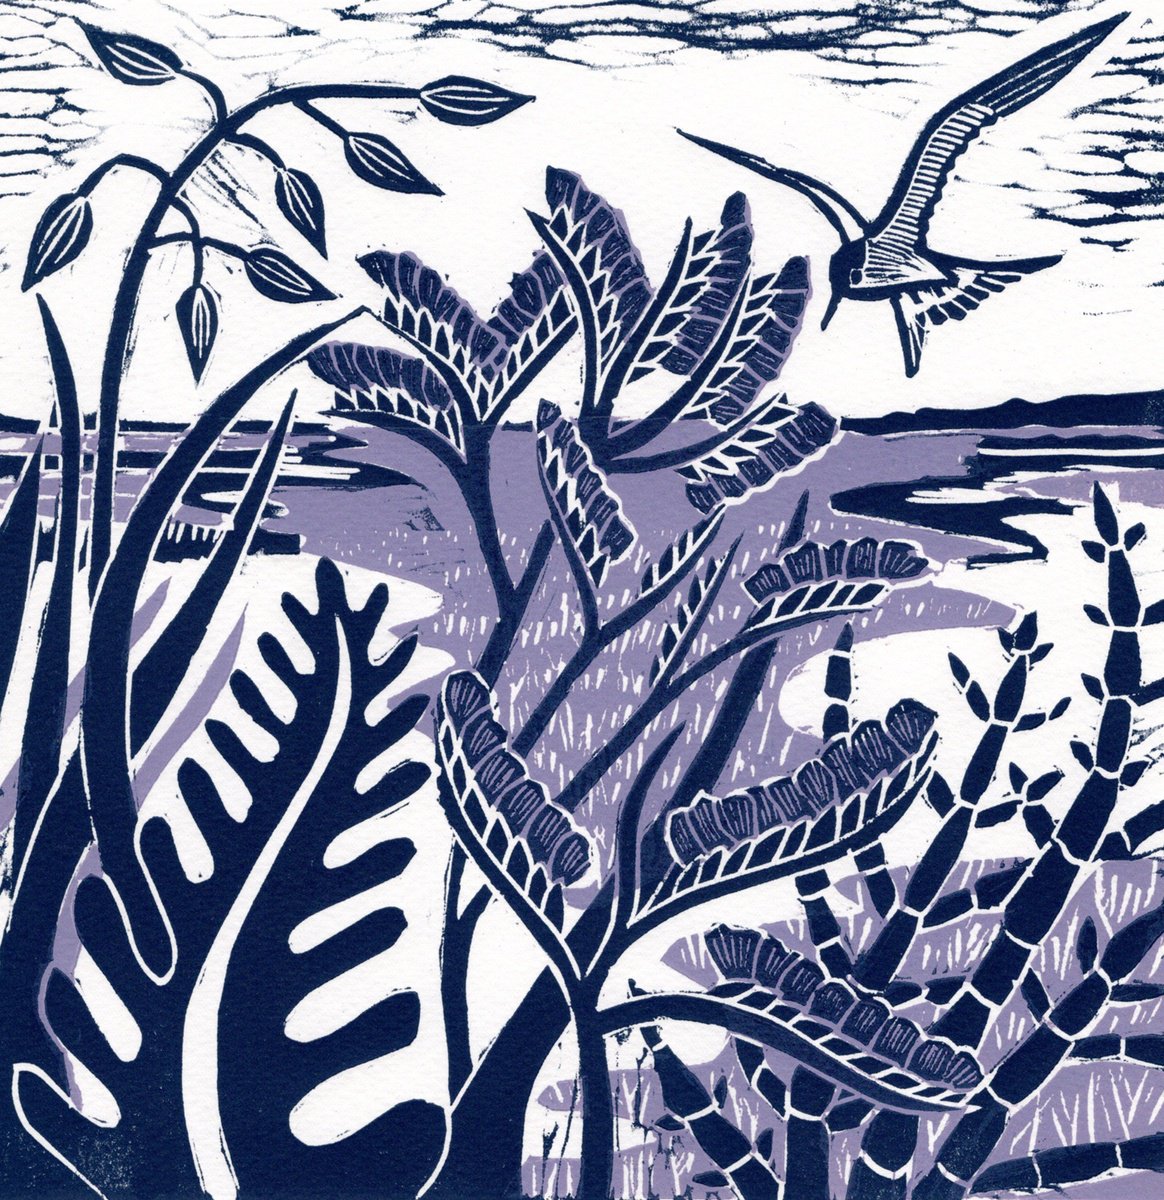 Sea Lavender and Samphire by Kate Heiss